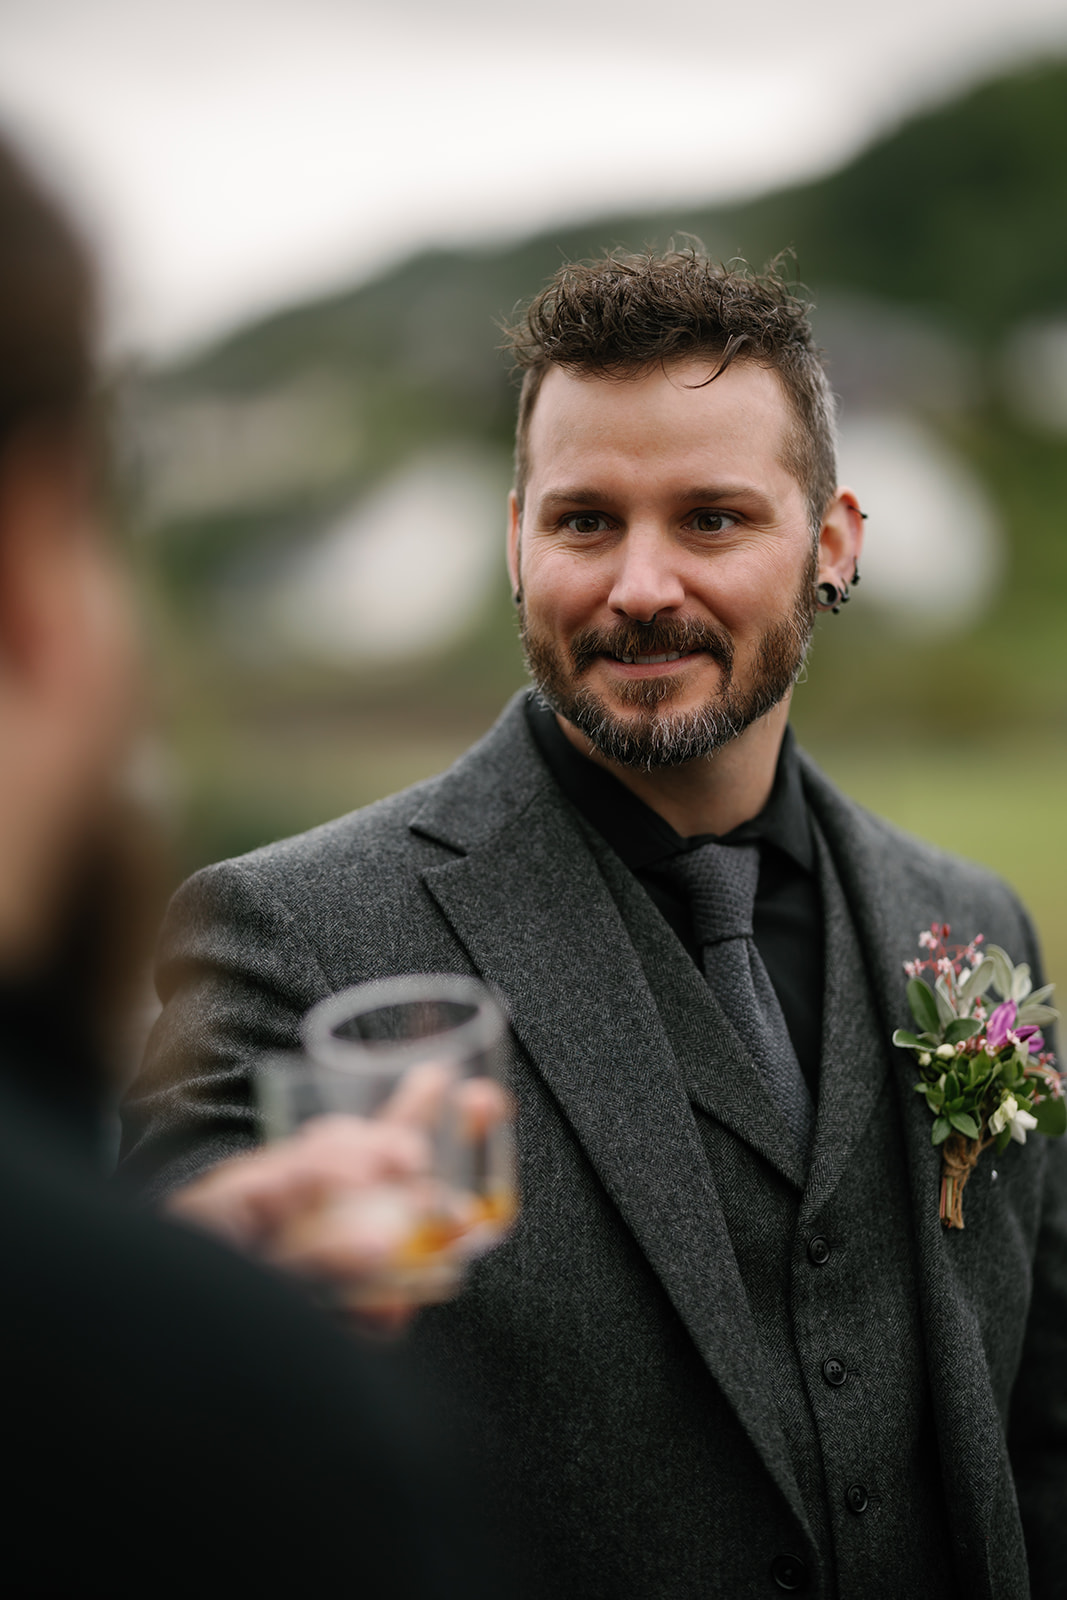 Groom Nick, flanked by his best man and officiant Wes, shares a dram of local Skye whisky, Talisker